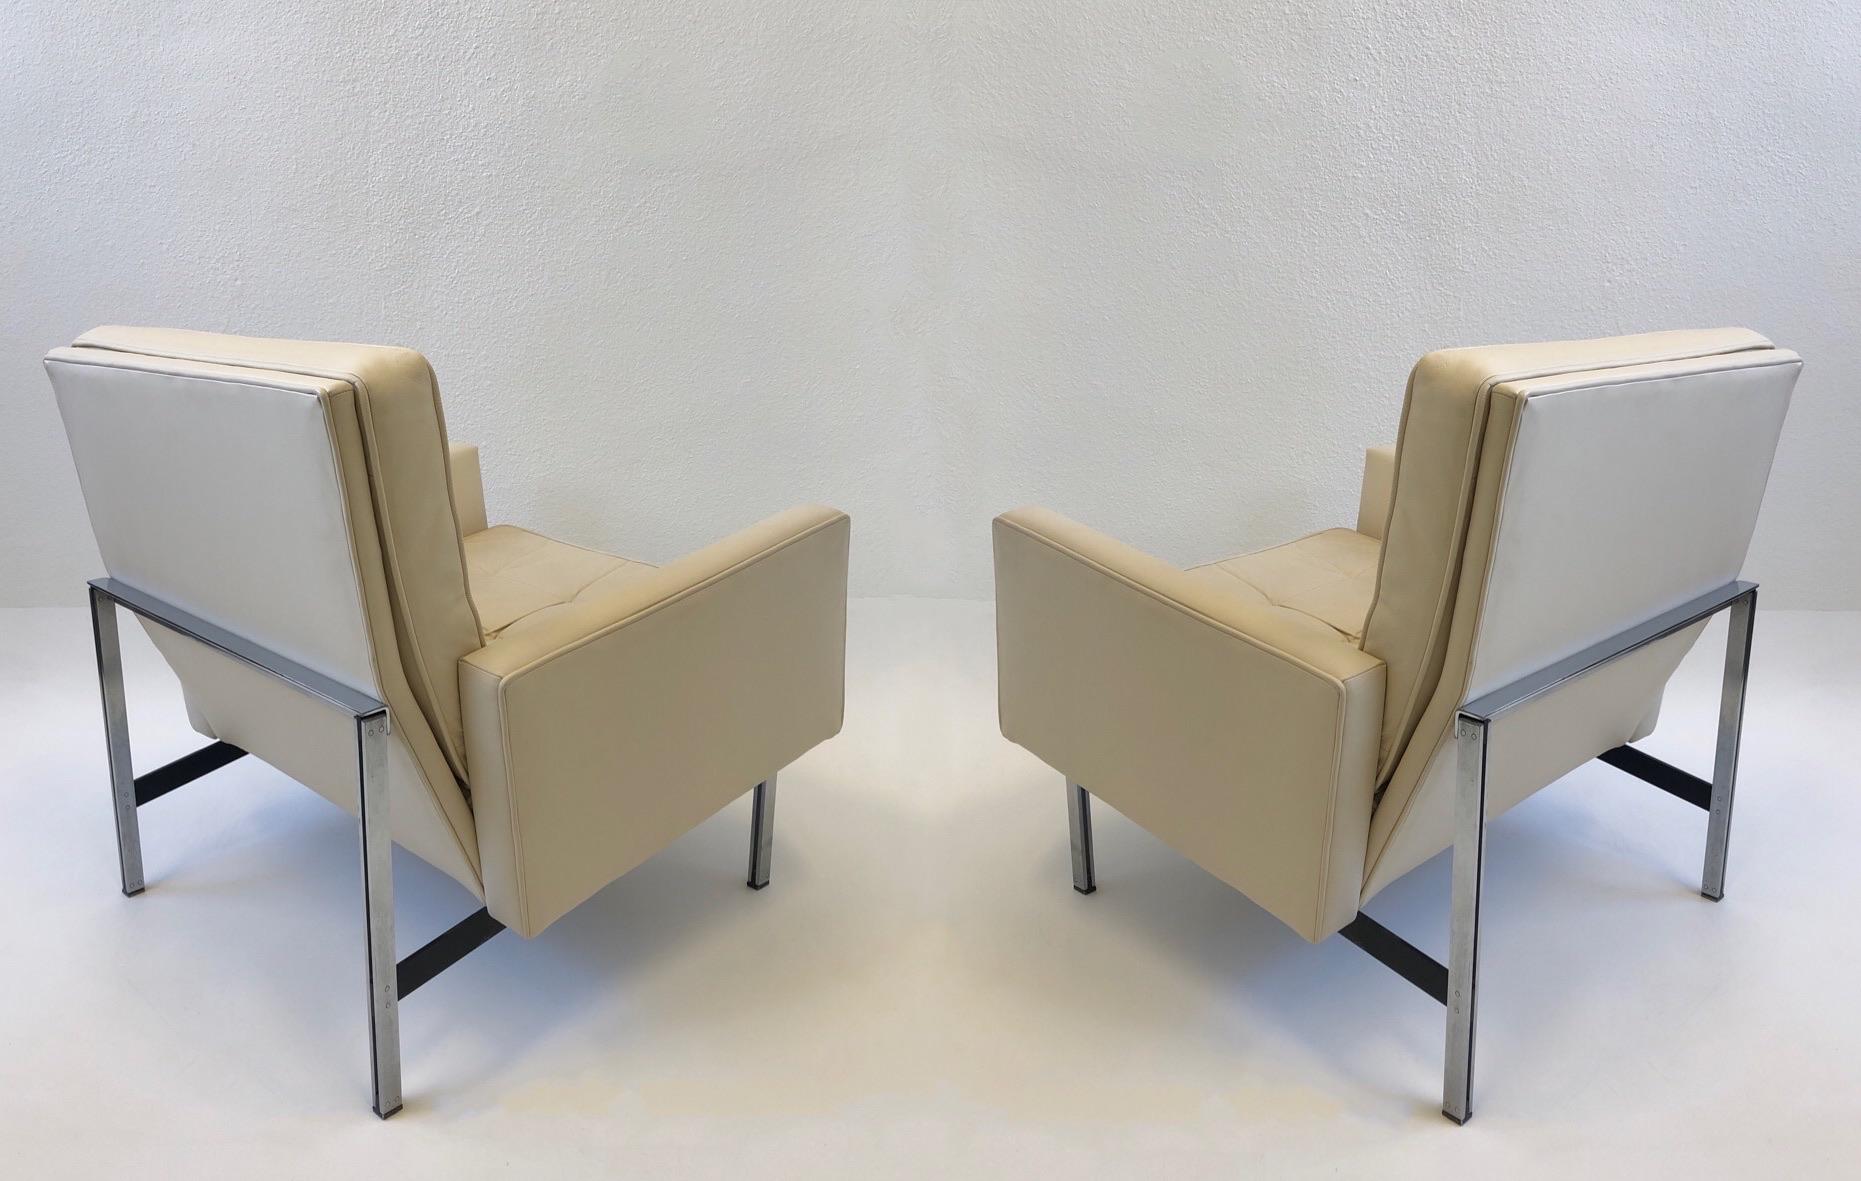 Beautiful 1950’s off white leather with parallel bar stainless steel legs lounge chairs designed by Florence Knoll for Knoll.
This came out of the embassy of Australia.
The sofa is also available.
Measurements: 30” wide, 30” deep, 31” high, 21.5”